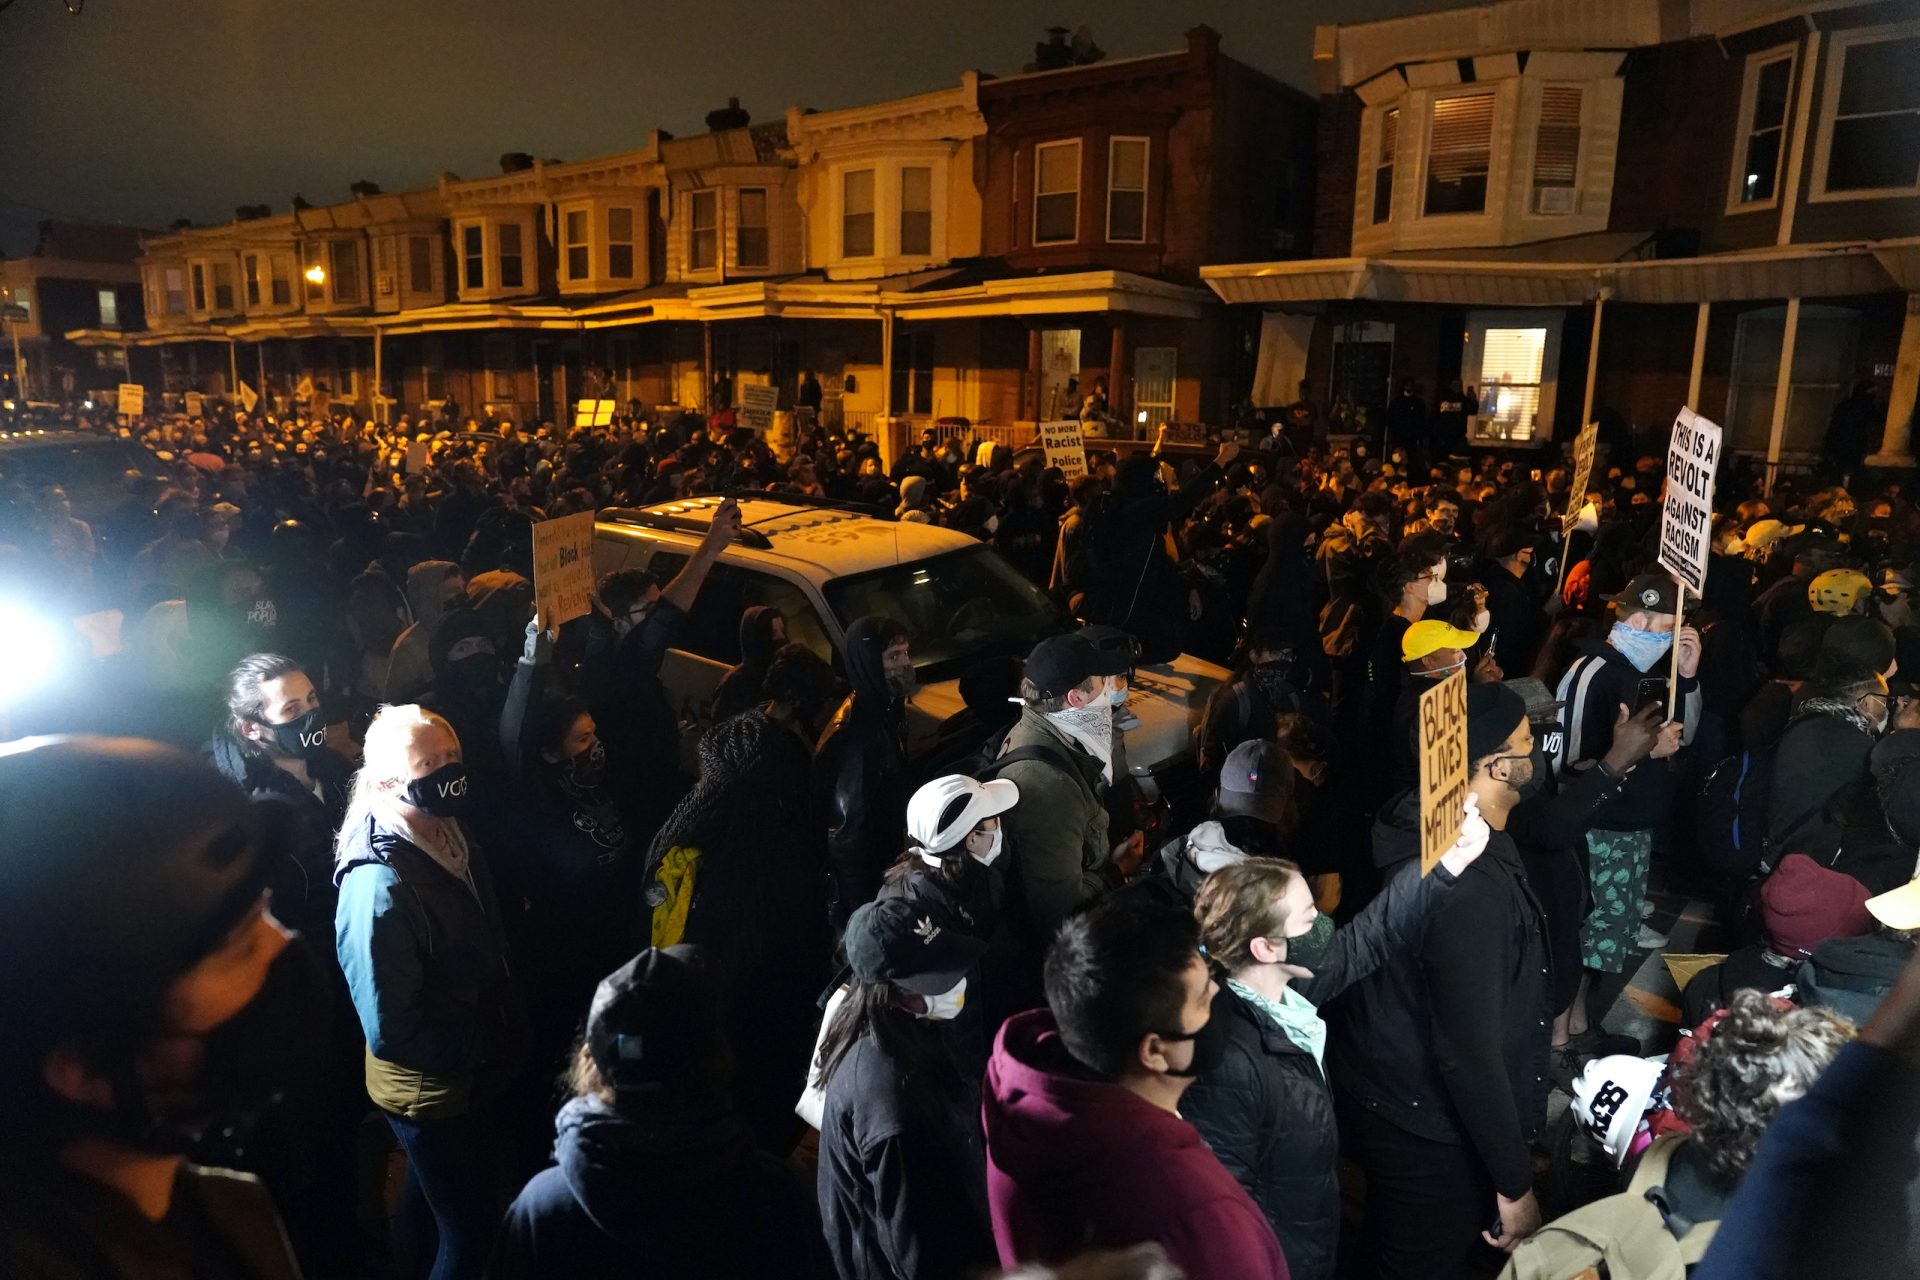 Protestors confront police during a march Tuesday Oct. 27, 2020 in Philadelphia. Hundreds of demonstrators marched in West Philadelphia over the death of Walter Wallace, a Black man who was killed by police in Philadelphia on Monday. Police shot and killed the 27-year-old on a Philadelphia street after yelling at him to drop his knife.